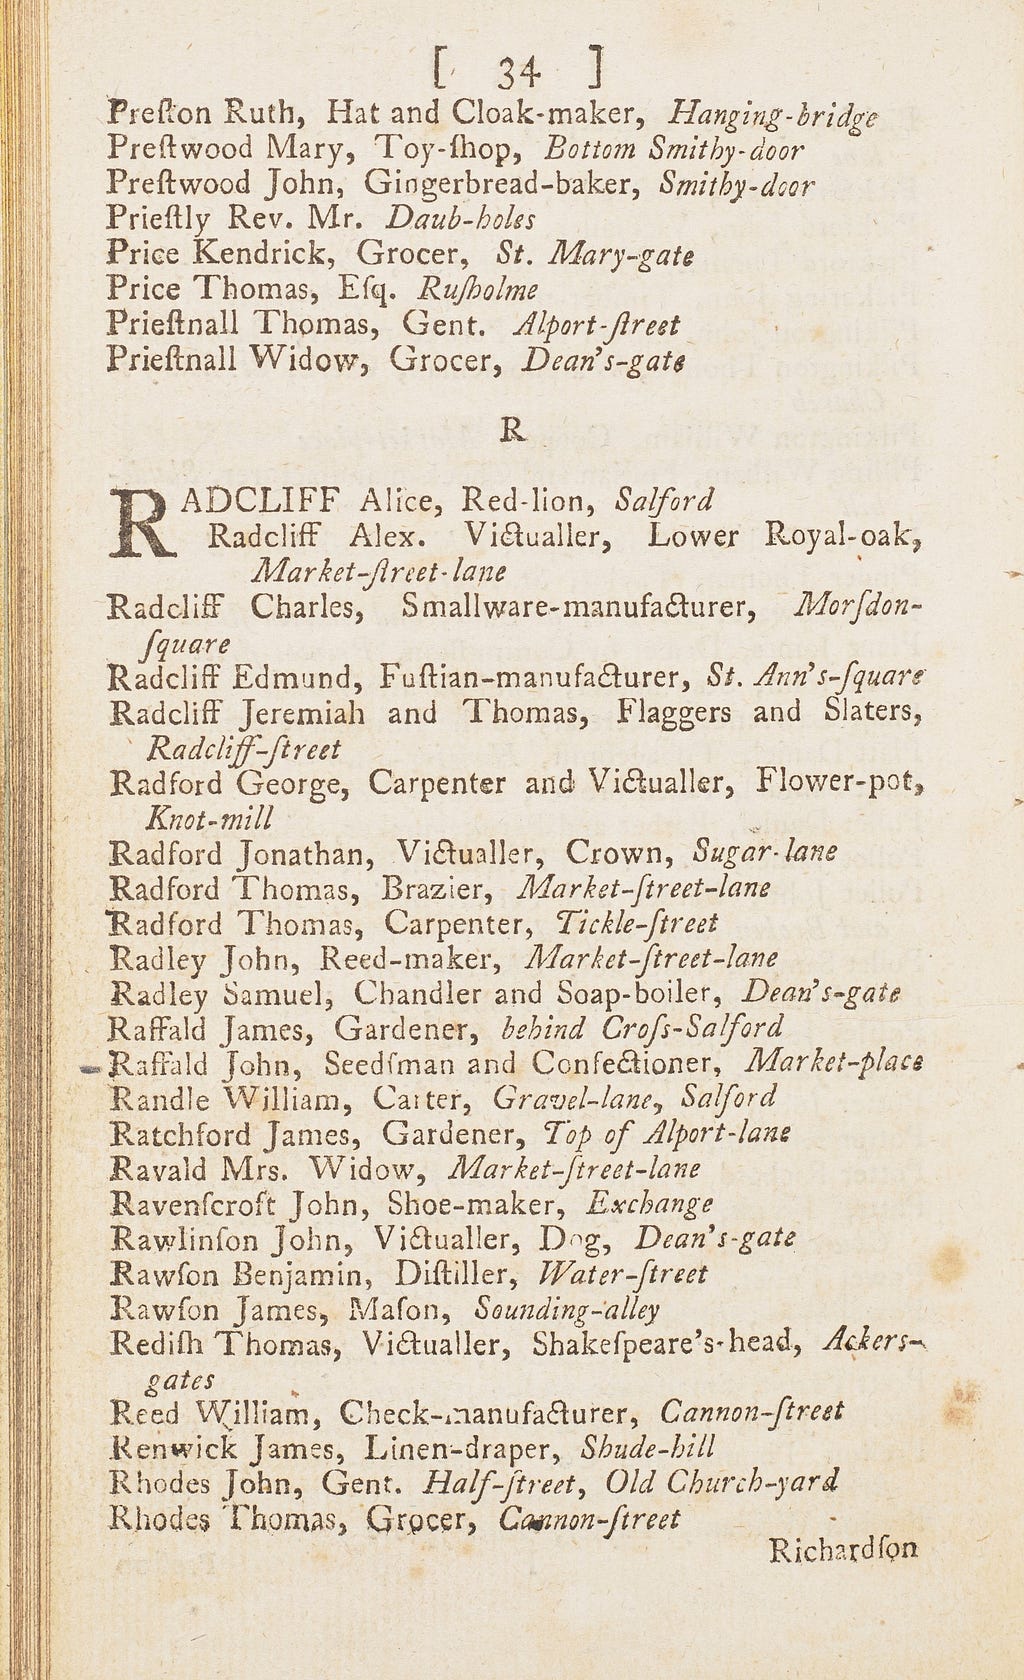 Page 34 of a Manchester trade directory listing names from Preston to Rhodes.